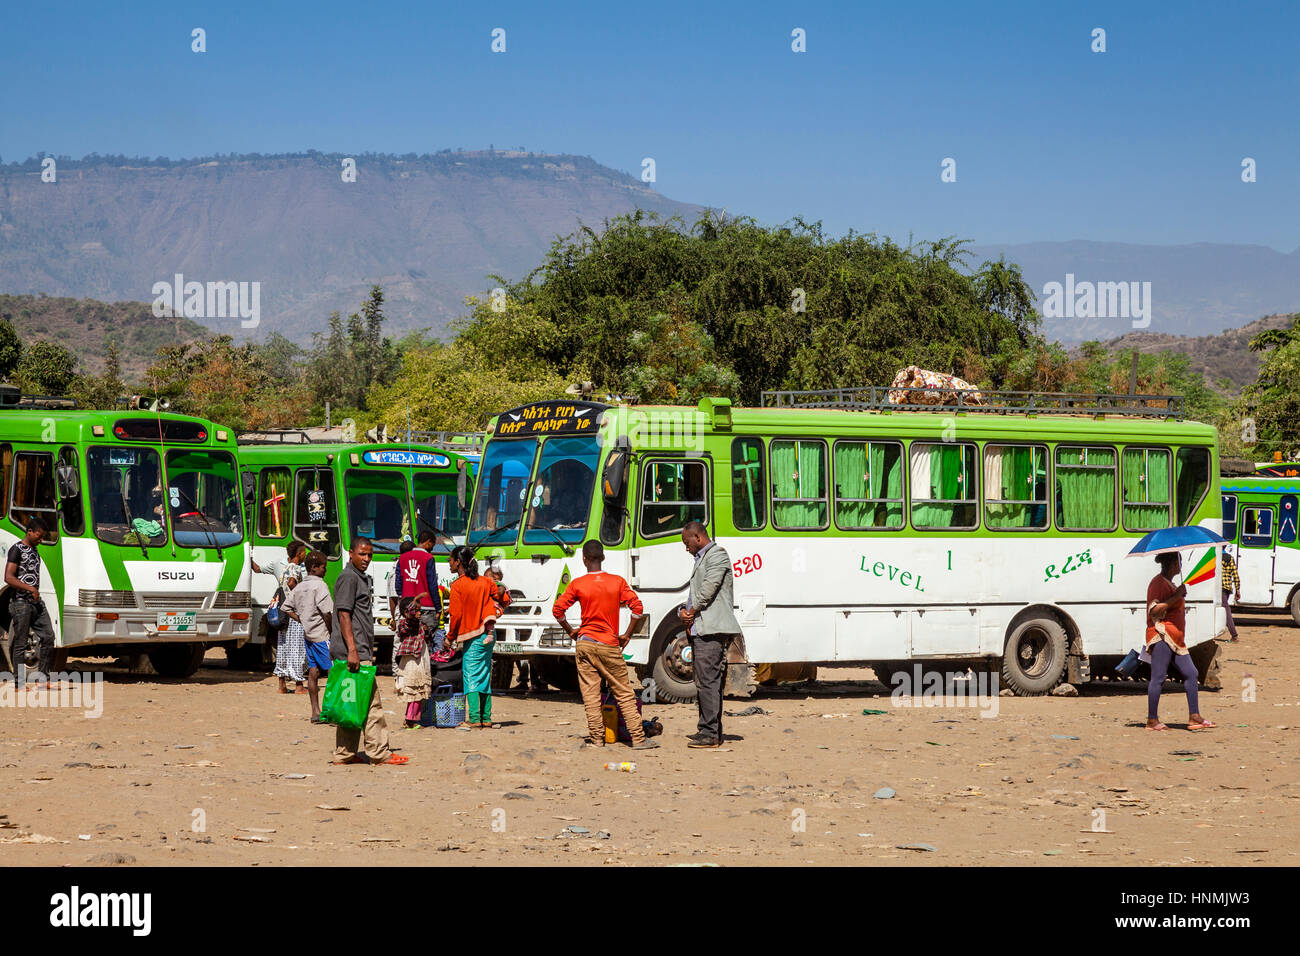 Page 2 - Main Bus Station High Resolution Stock Photography and Images -  Alamy